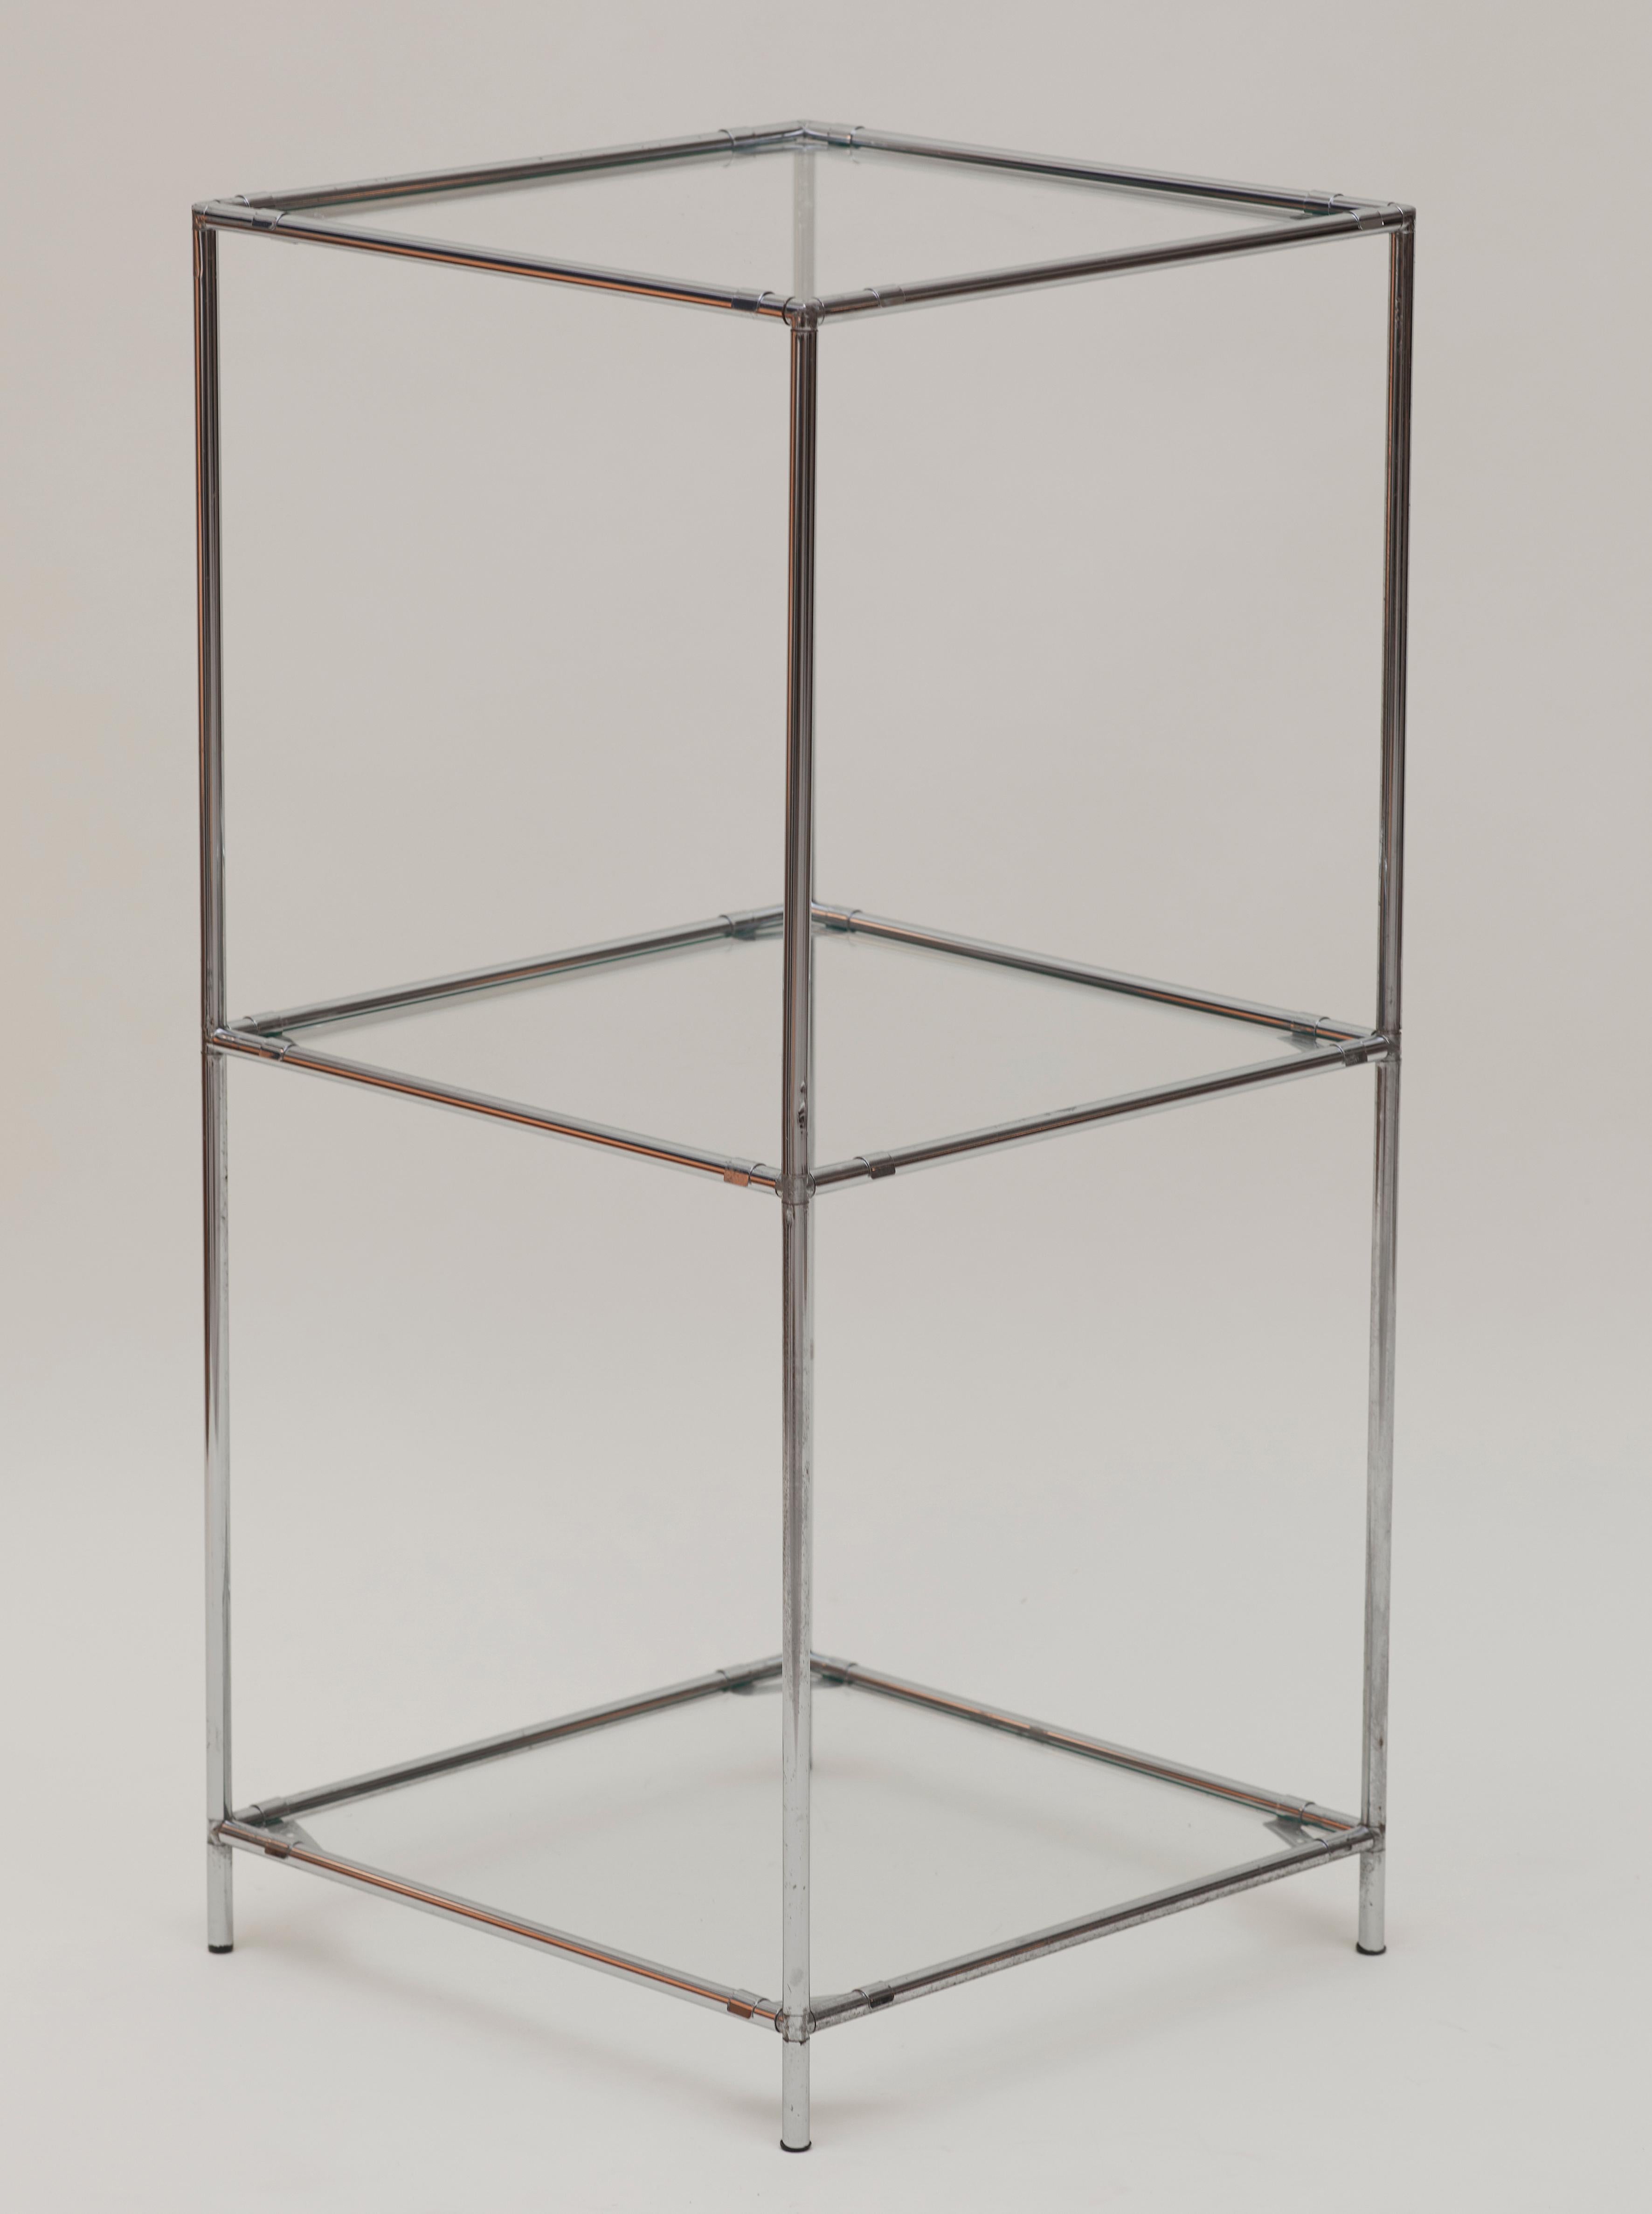 Original Poul Cadovius “Abstracta” modular bookcase (not the re-edition). Designed for Royal System, England c. 1960.

Features an elegant chromed tubular structure and glass shelves.

Wide enough for 12 inches records, plants, or art books.

Very